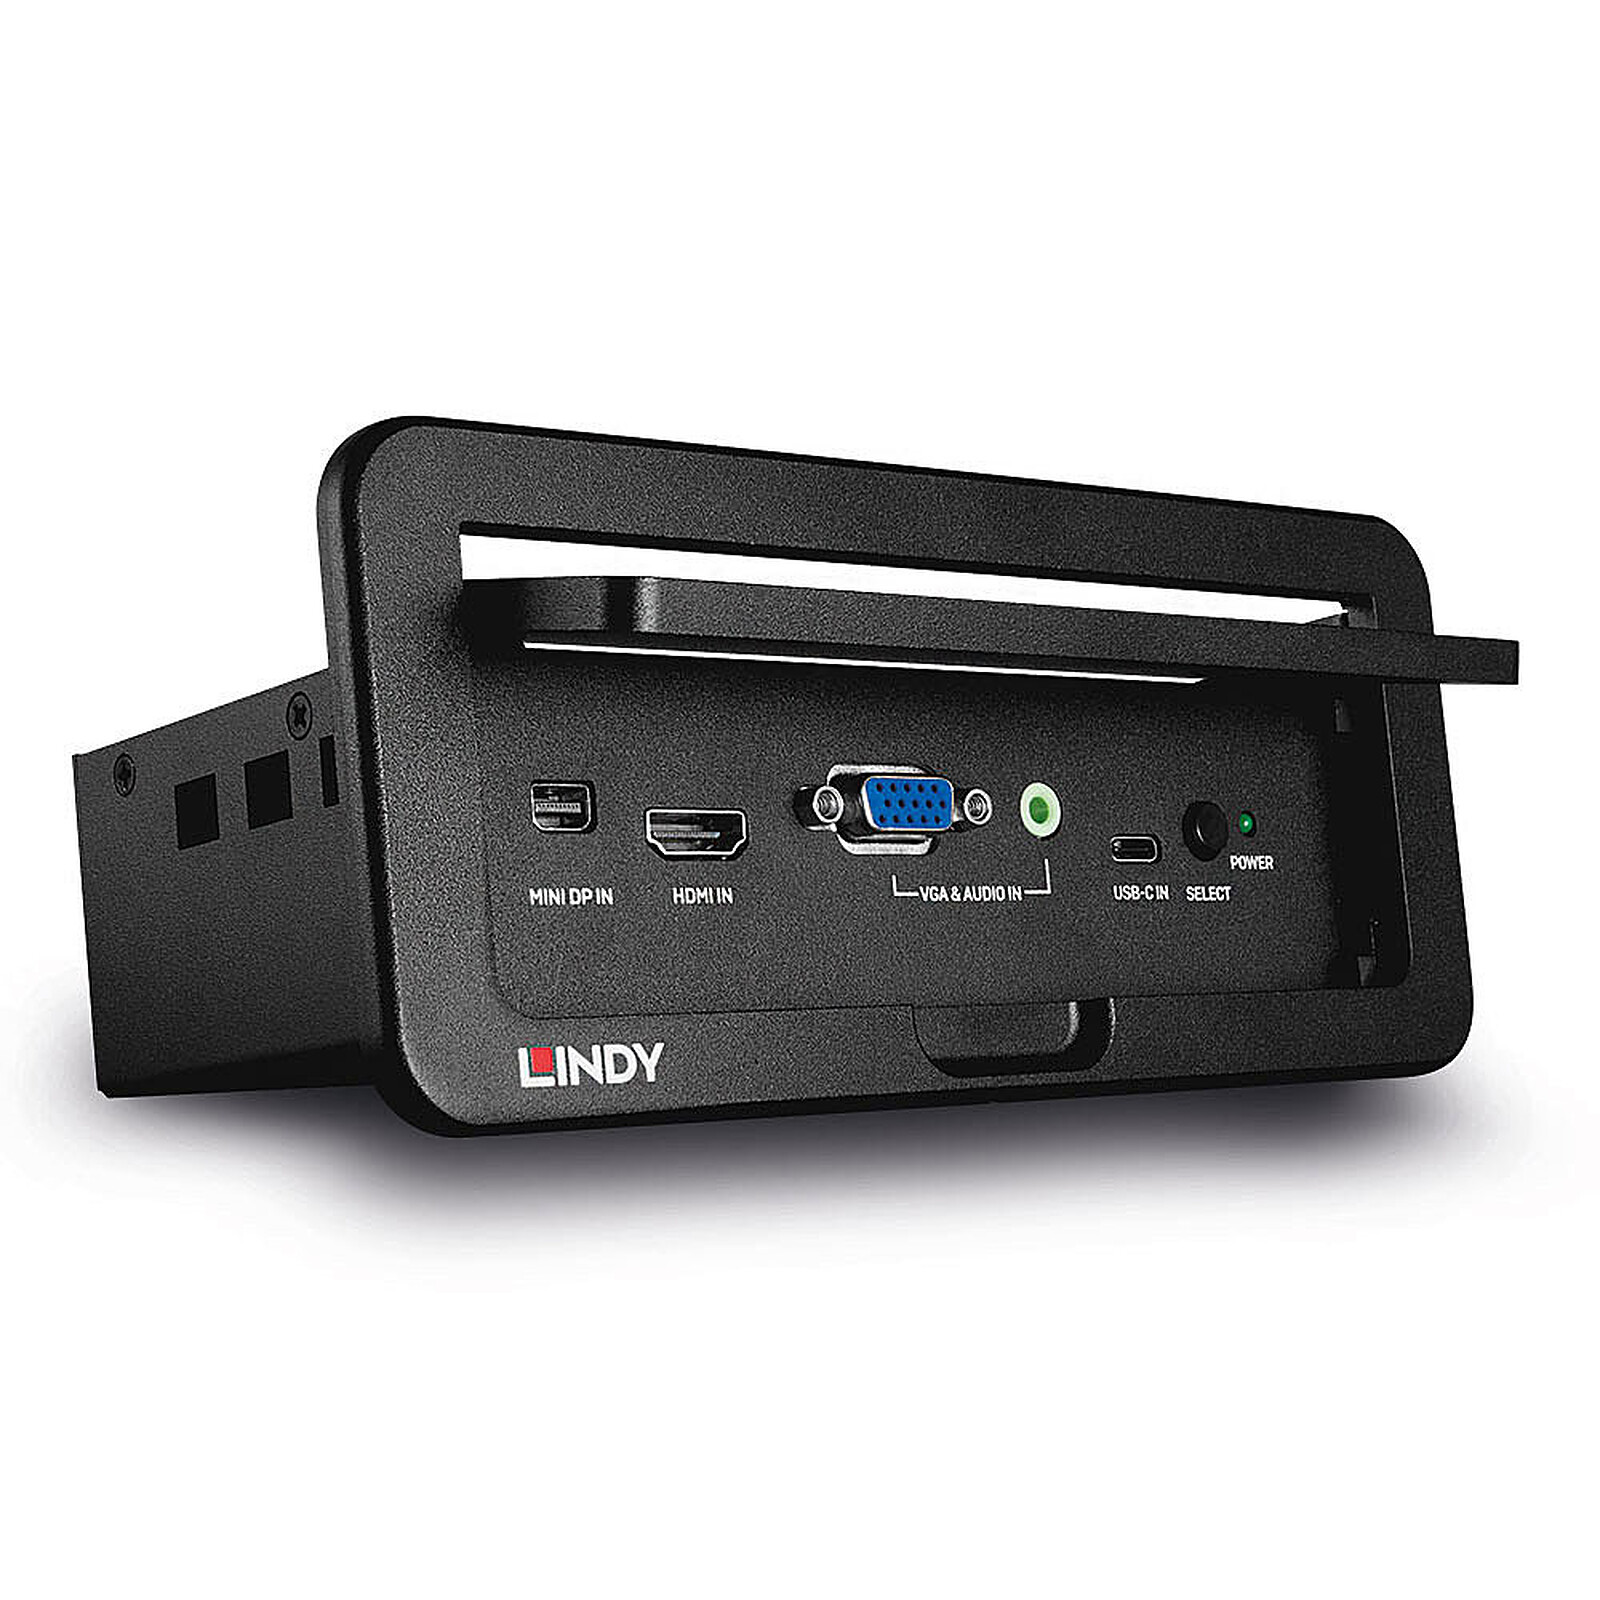 Switch HDMI - Achat, guide & conseil - LDLC